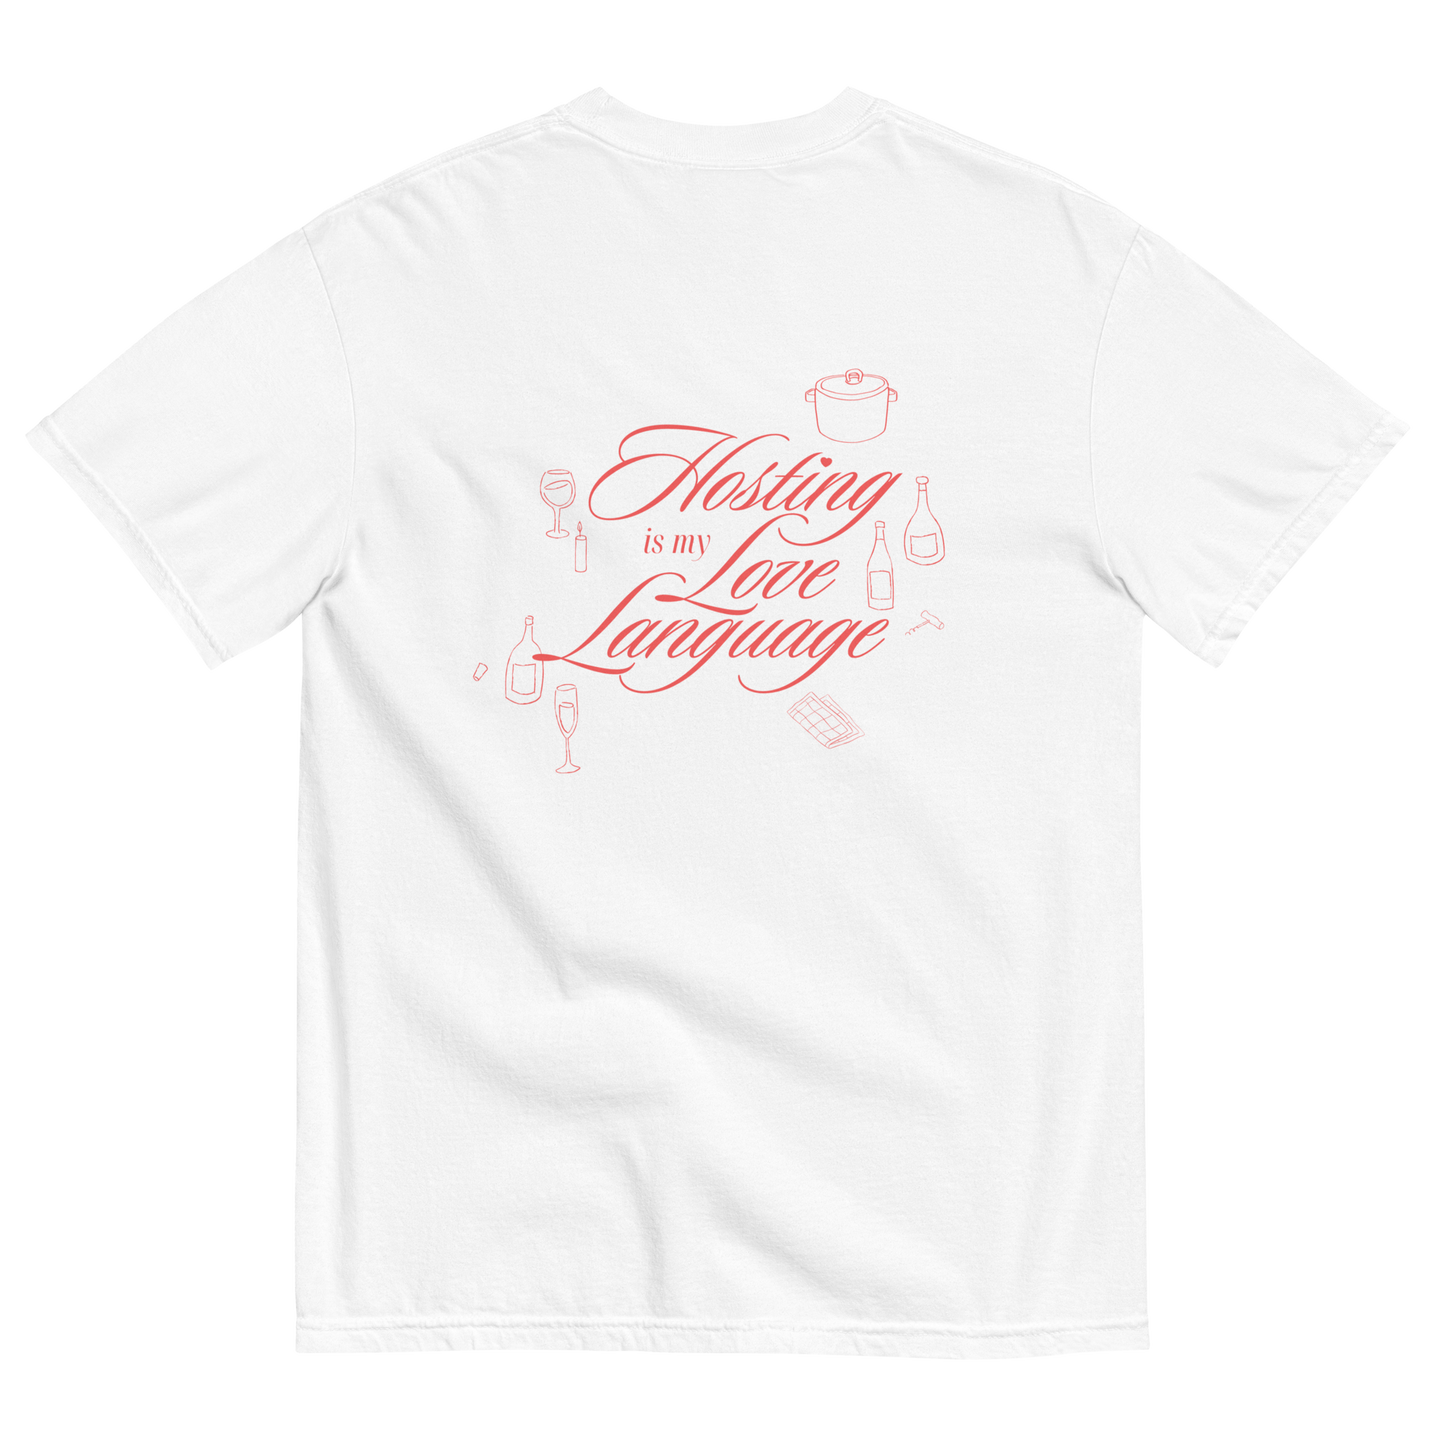 Dinner Party Club Graphic Tee - White